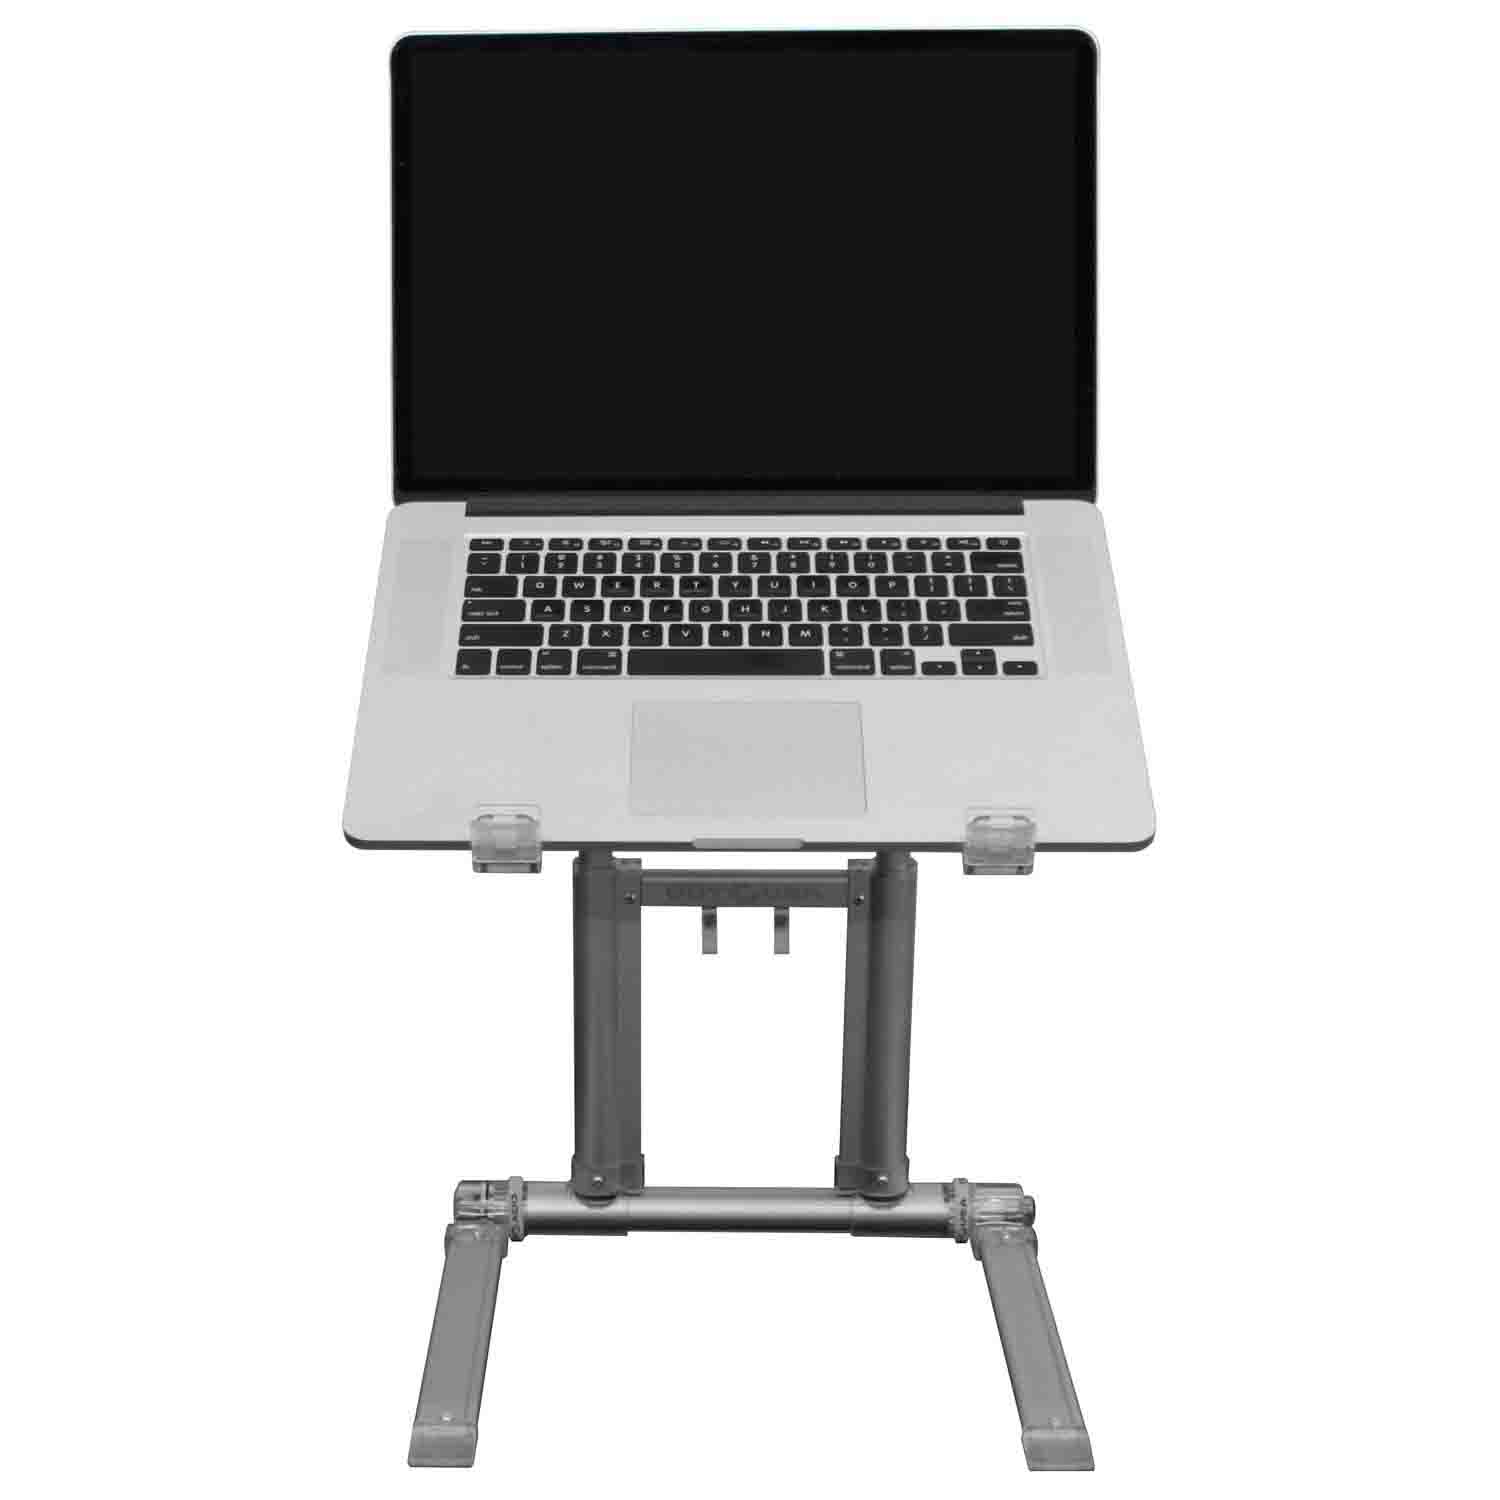 B-Stock: Odyssey LSTAND360MACSIL Laptop Stand for Tablet Laptop Folding DJ Stand Quick Setup - Silver - Hollywood DJ